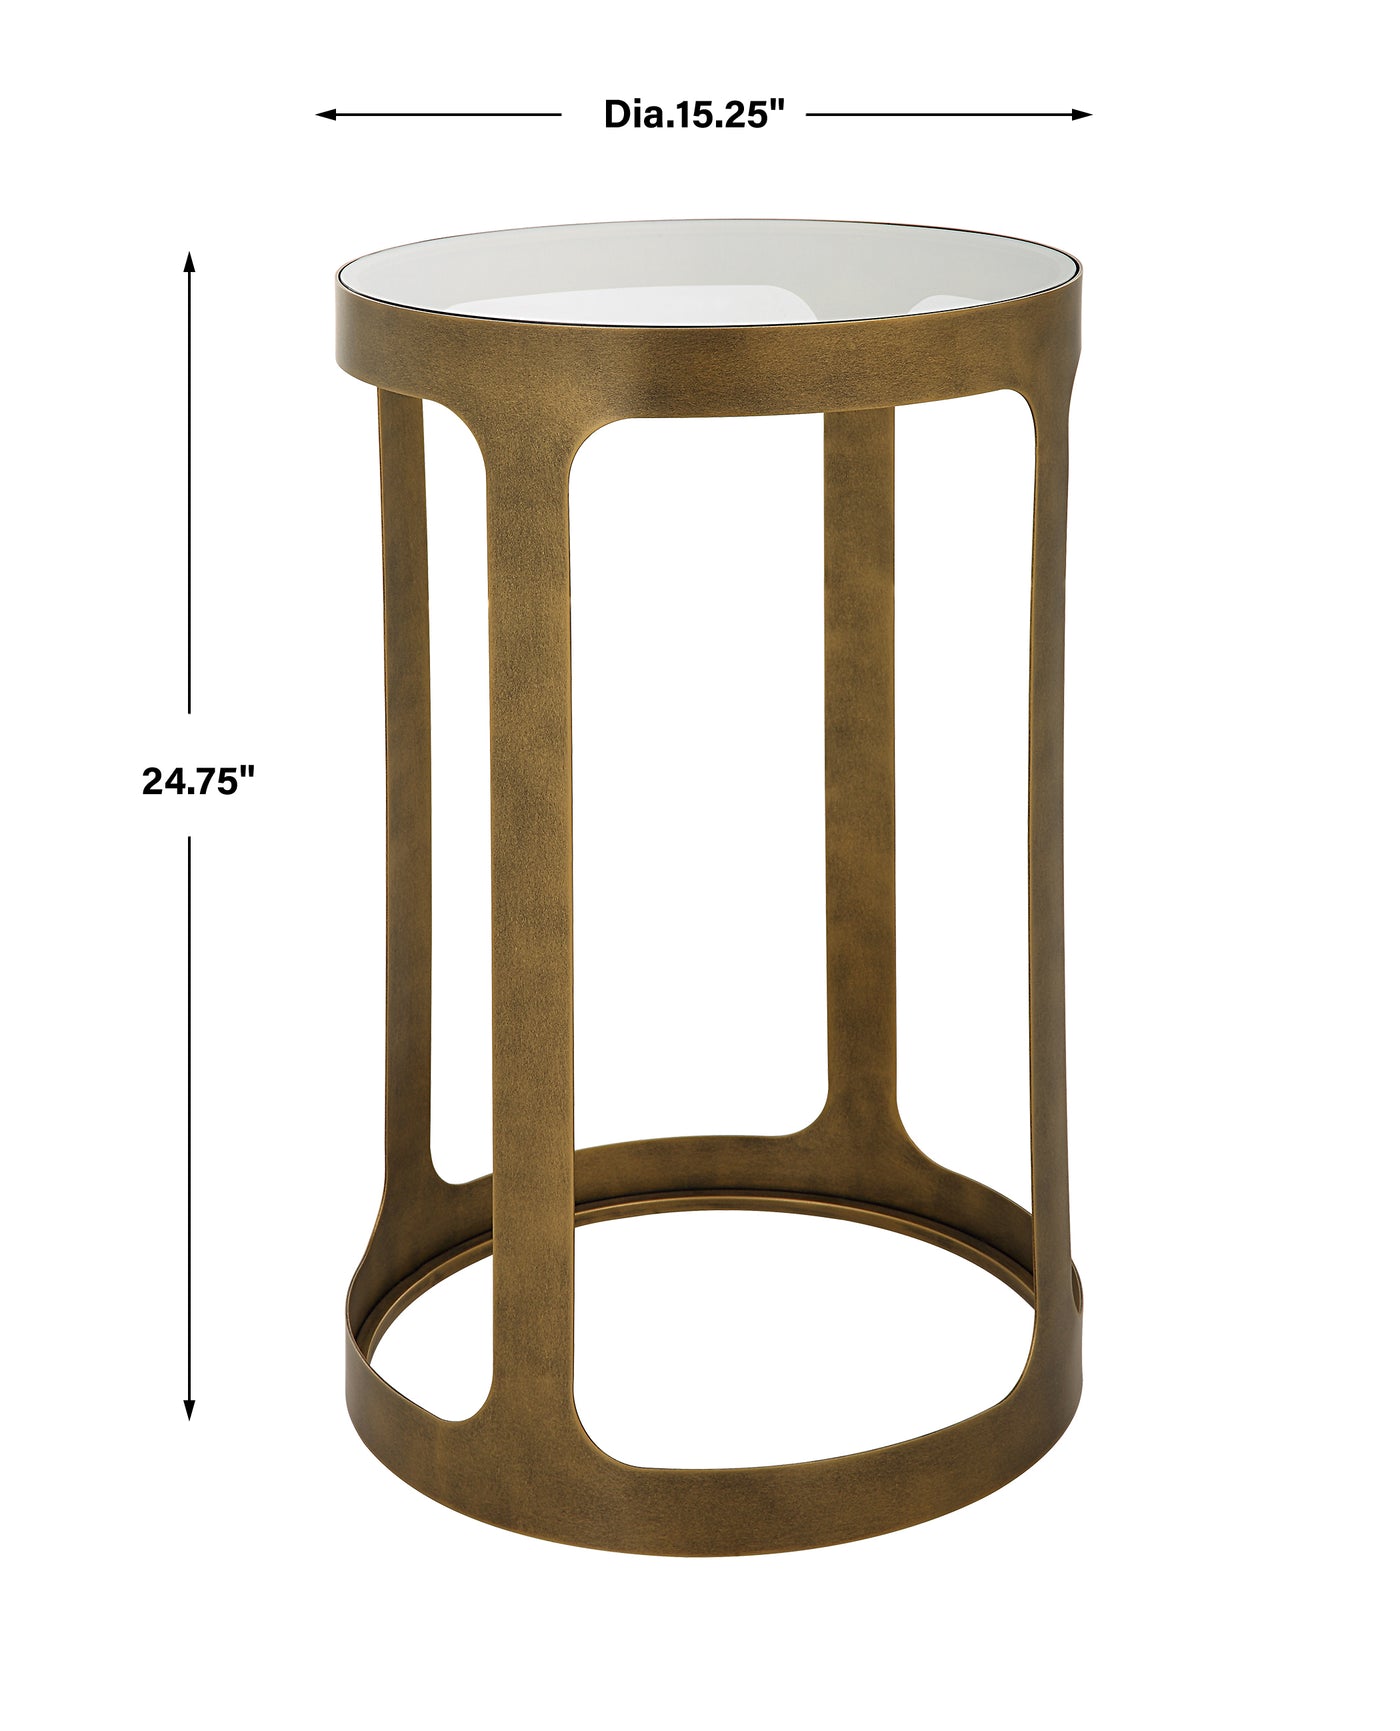 The Columbia Accent Table